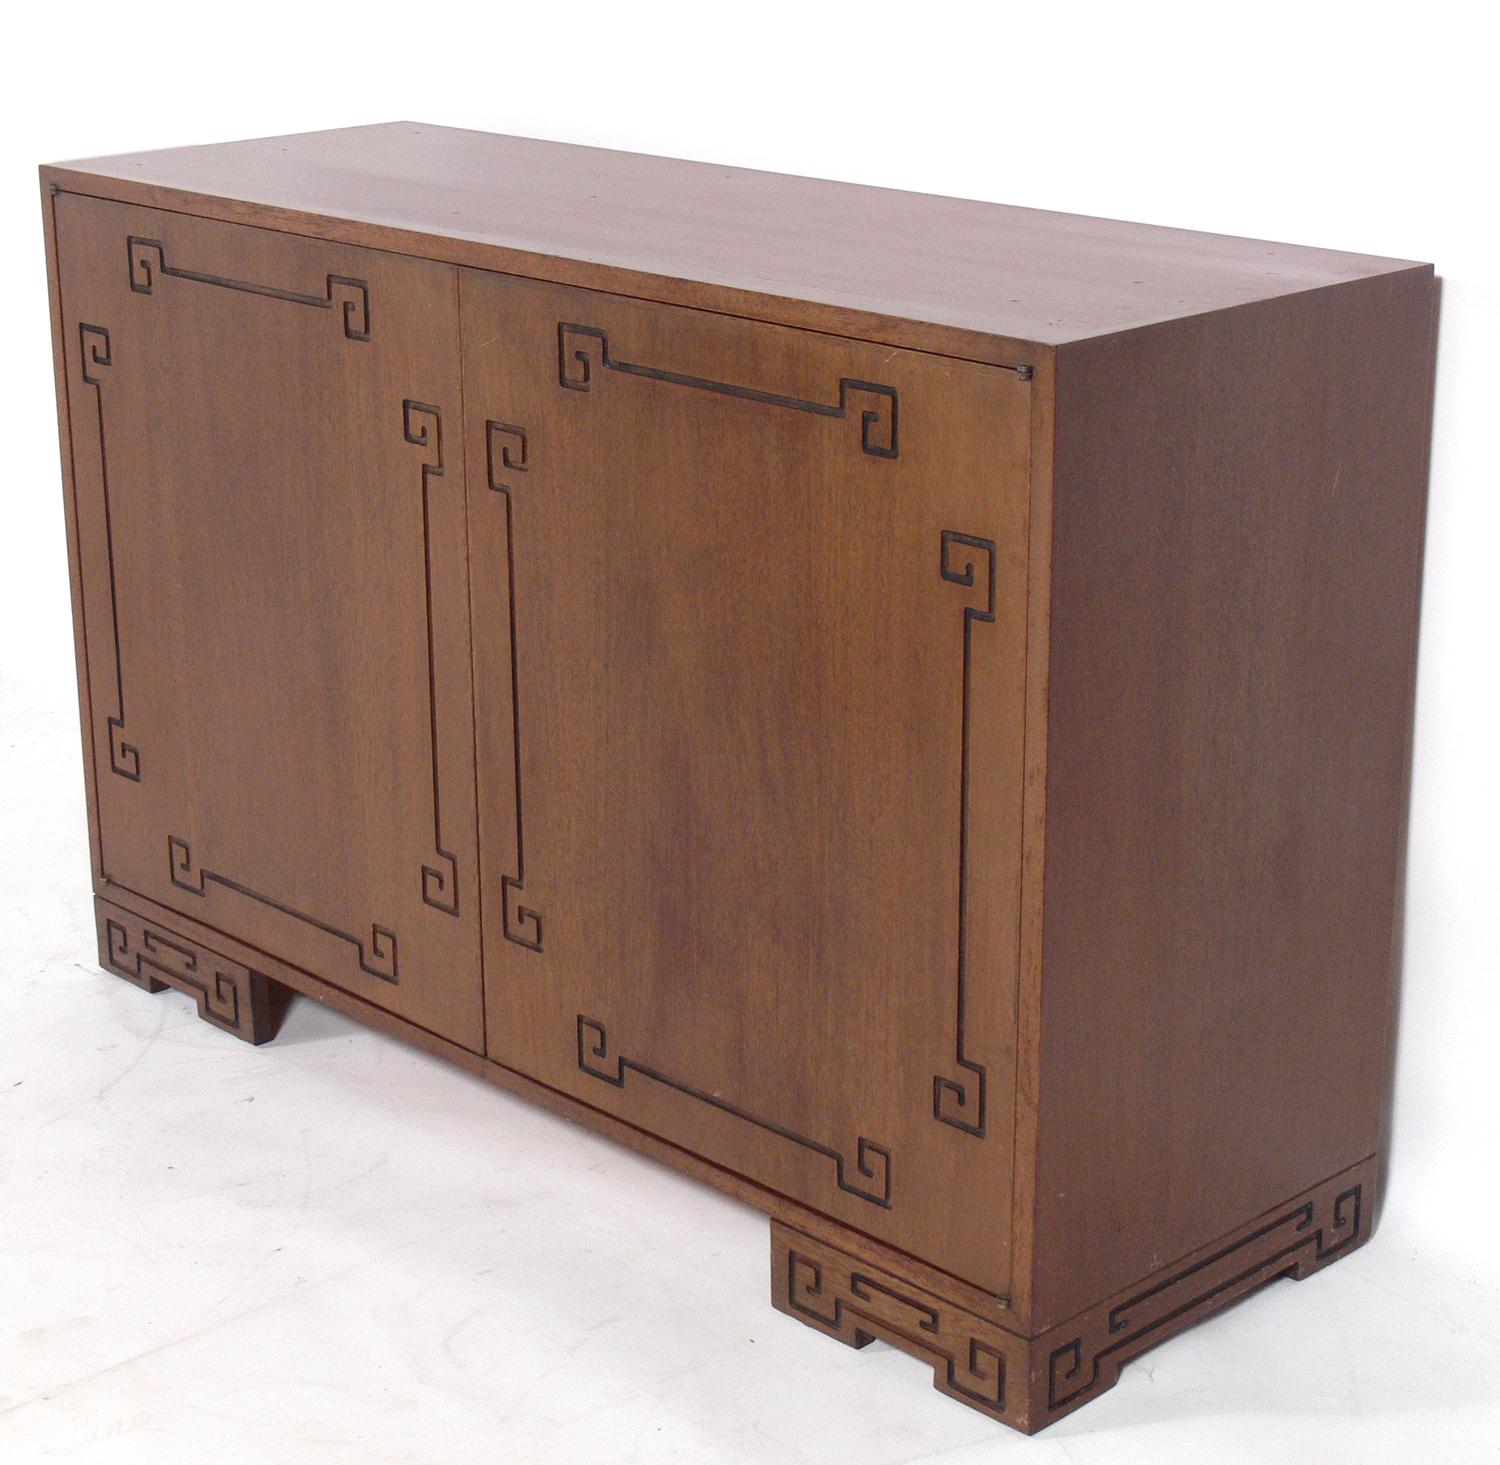 Pair of Asian influenced cabinets, to be refinished in your choice of color, American, circa 1950s. They are a versatile size and can be used in a living area as a credenza, bar cabinet, or media cabinet, or in a bedroom as chests or dressers. The